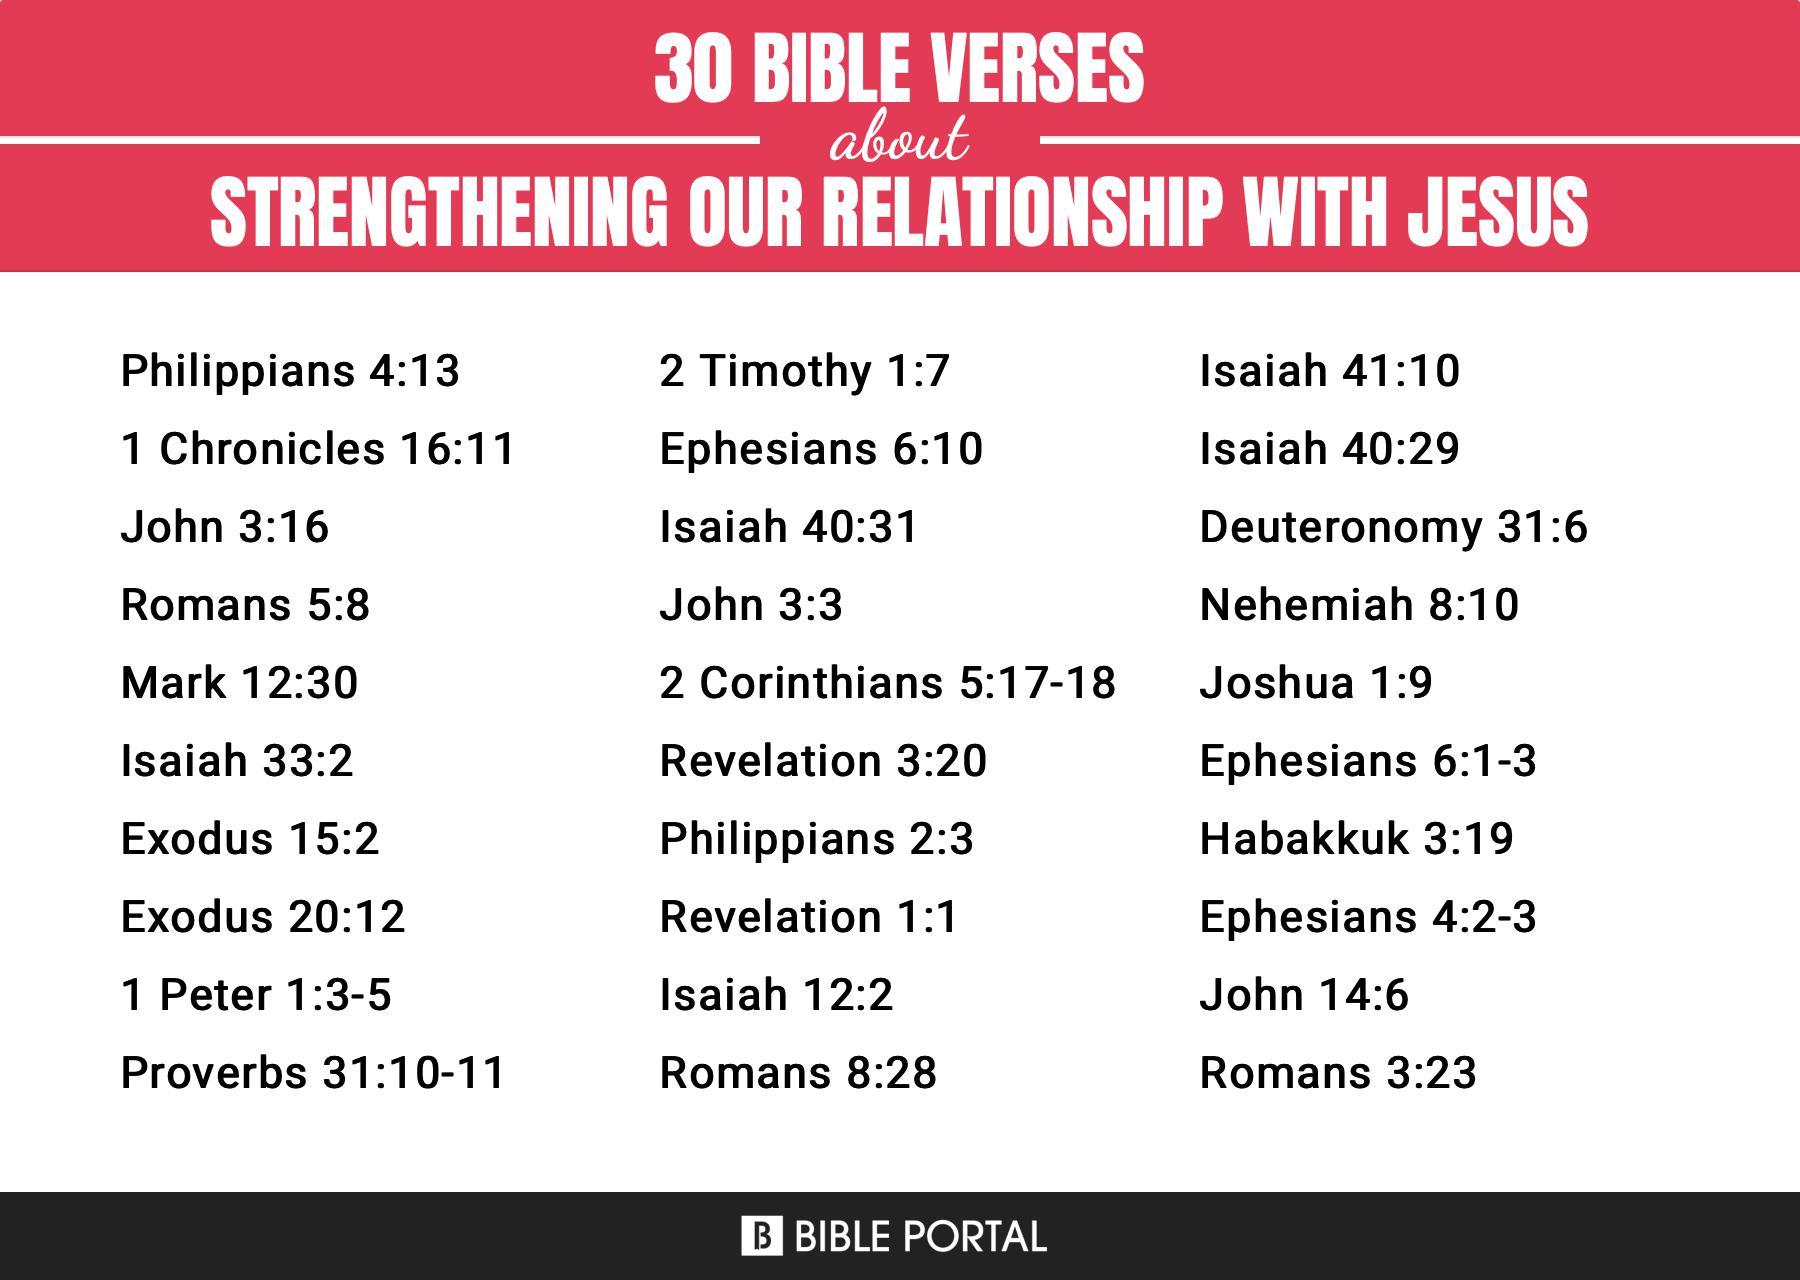 What Does the Bible Say about Strengthening Our Relationship With Jesus?